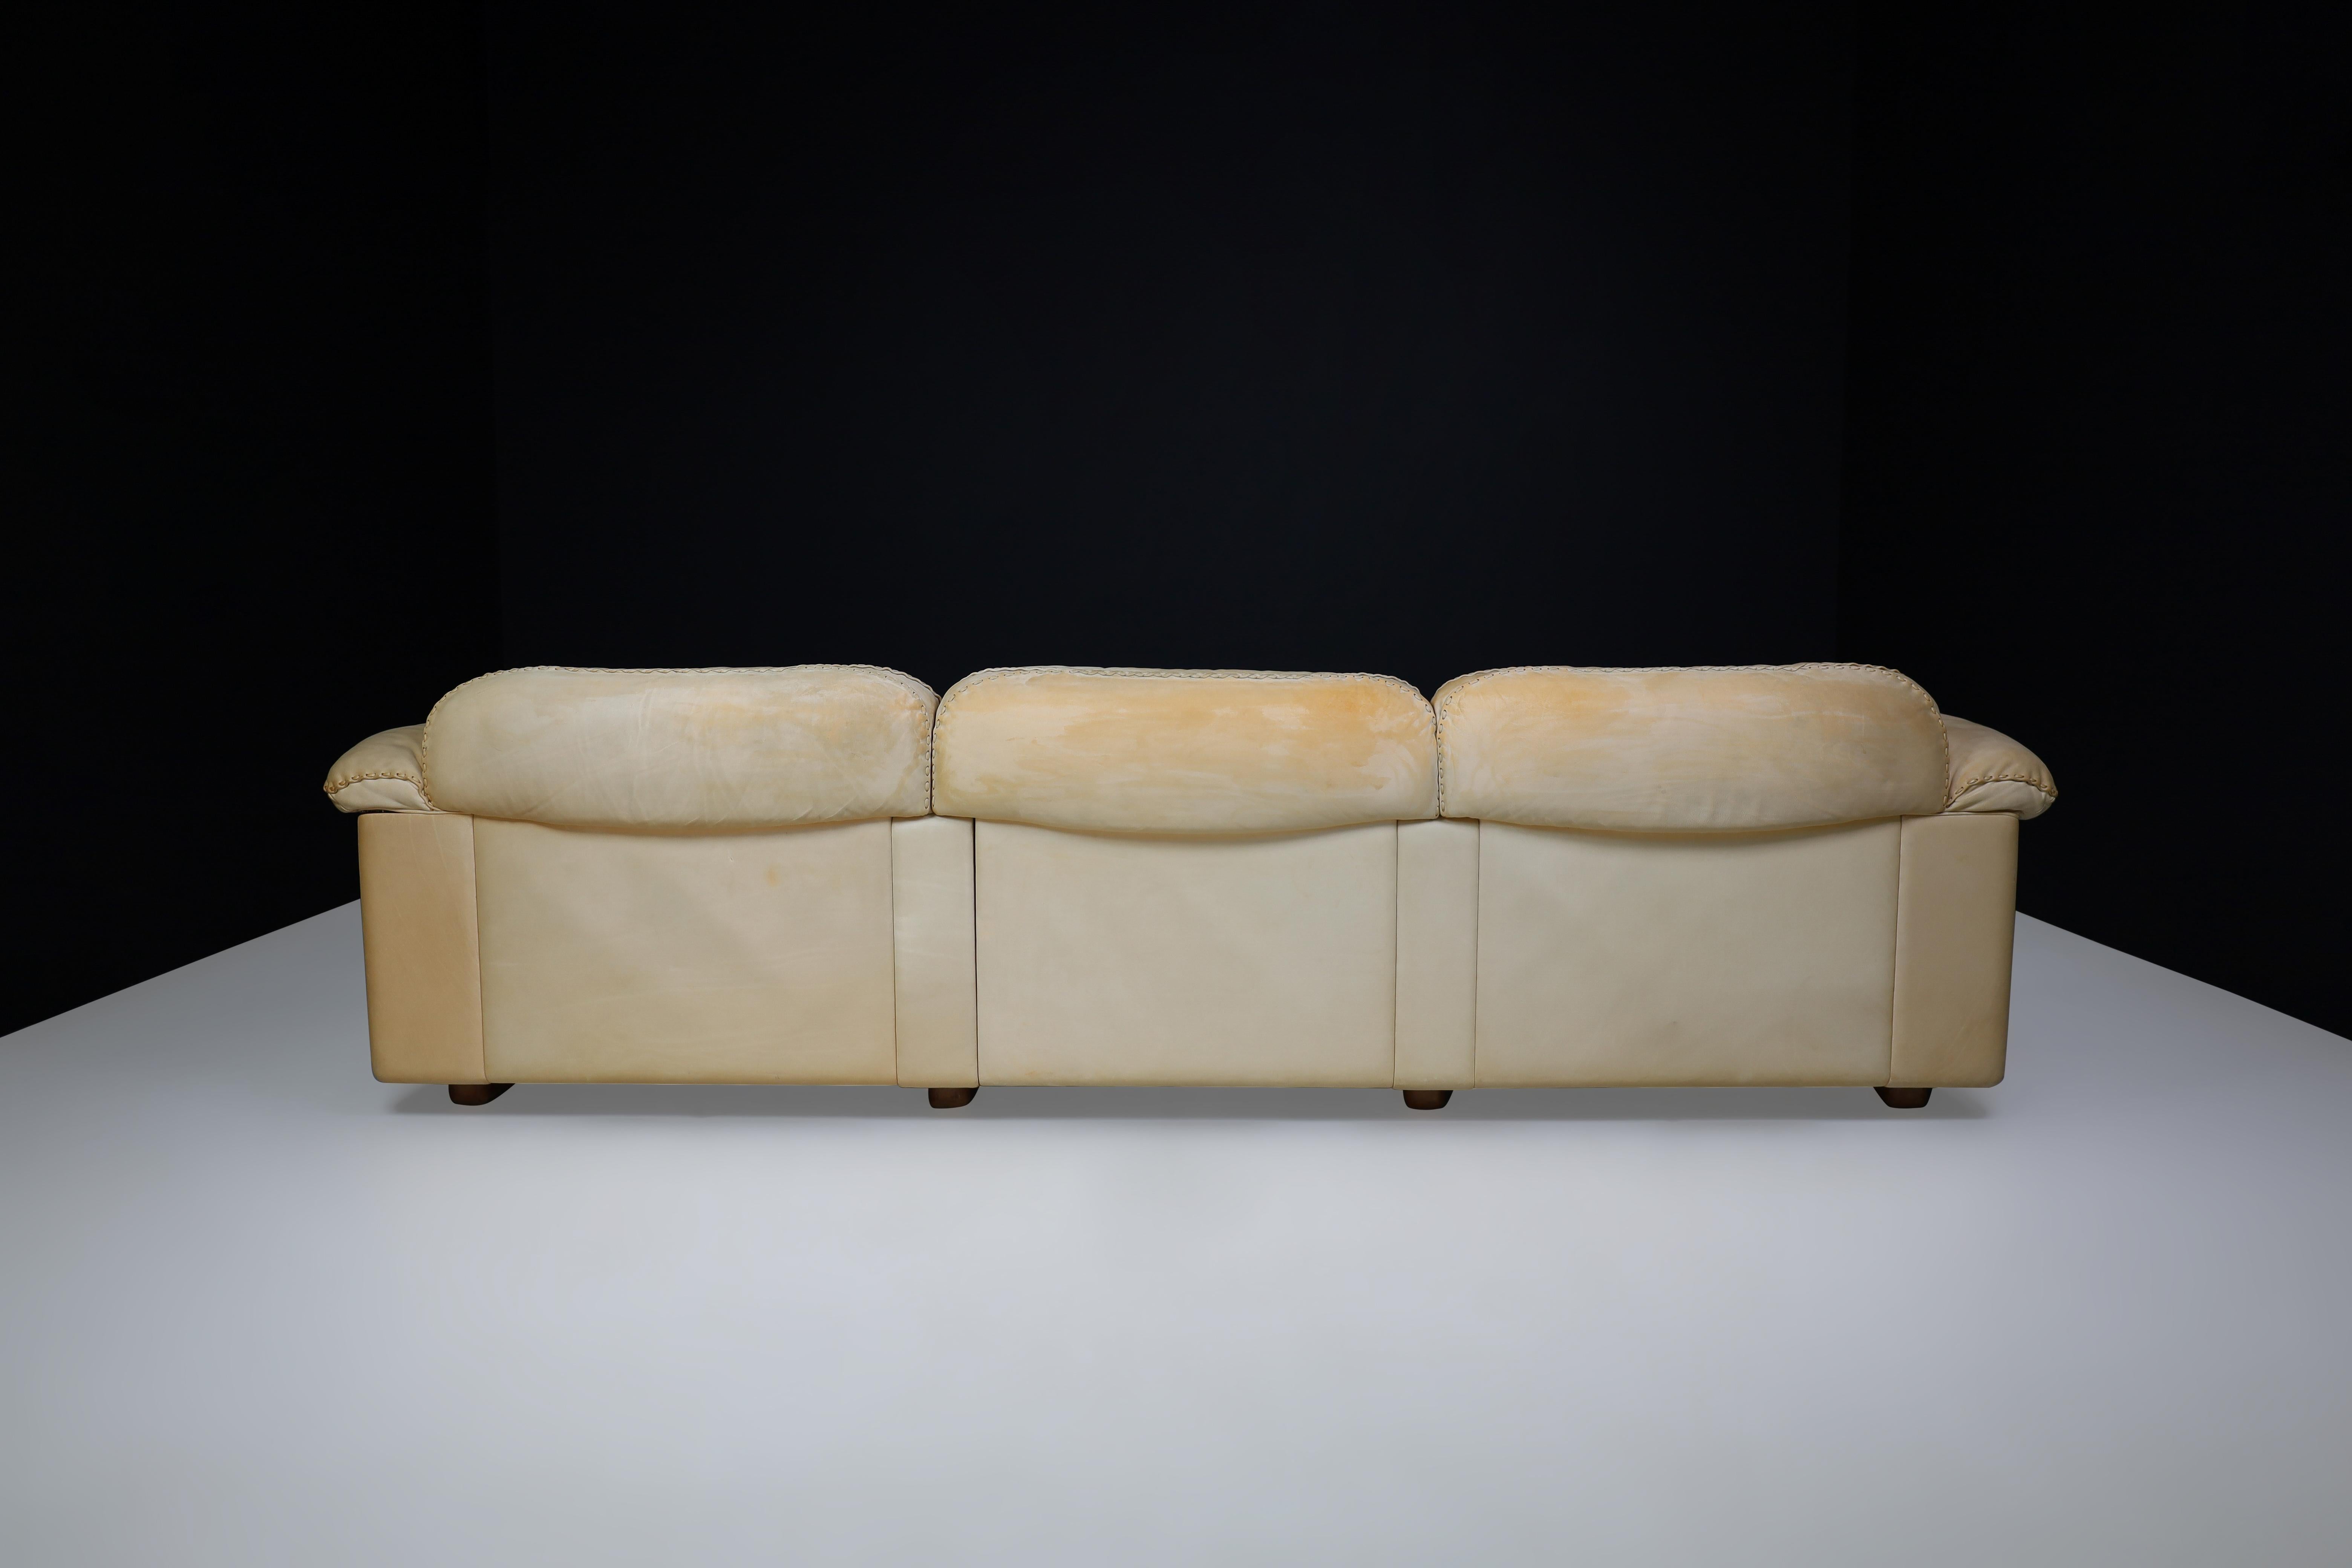 De Sede DS-101 Leather Three-Seater Sofa, Switzerland, 1960s For Sale 1